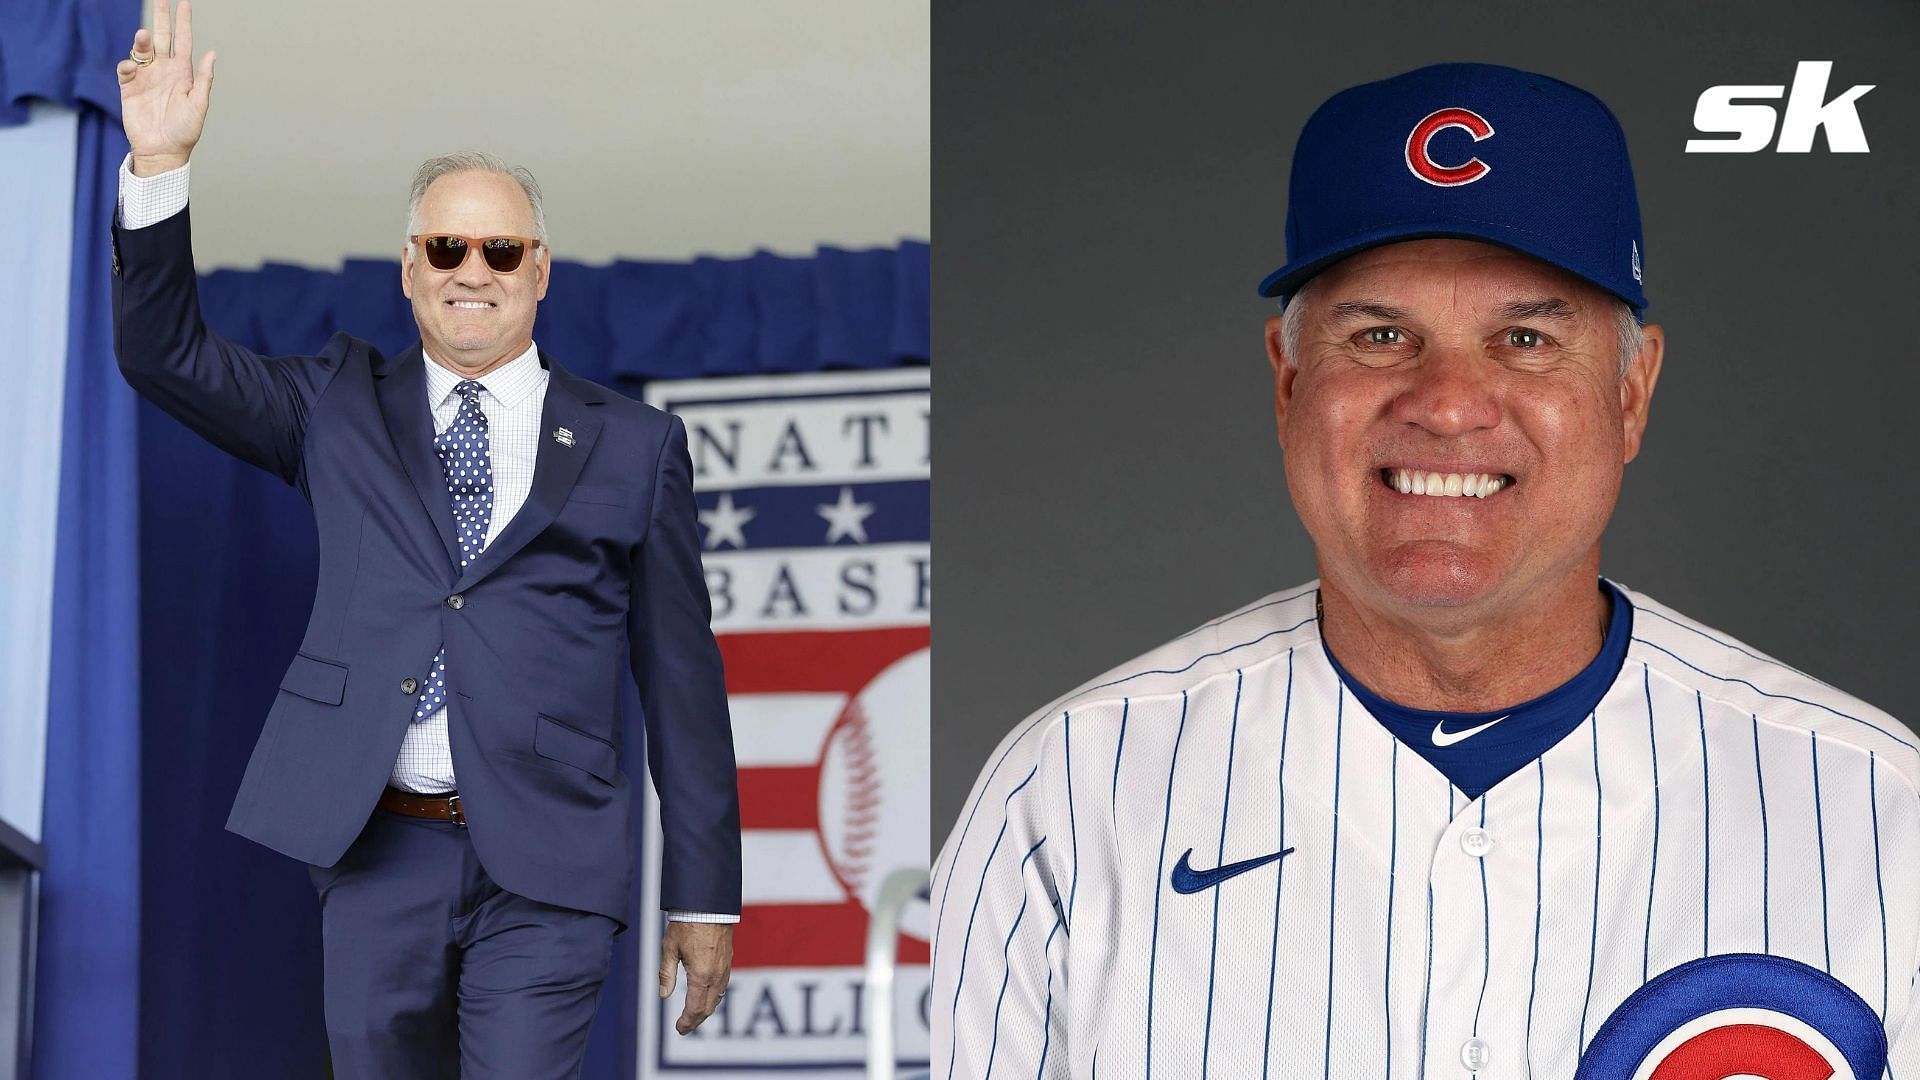 Hall of Famer Ryne Sandberg announced that he has been diagnosed with metastatic prostate cancer